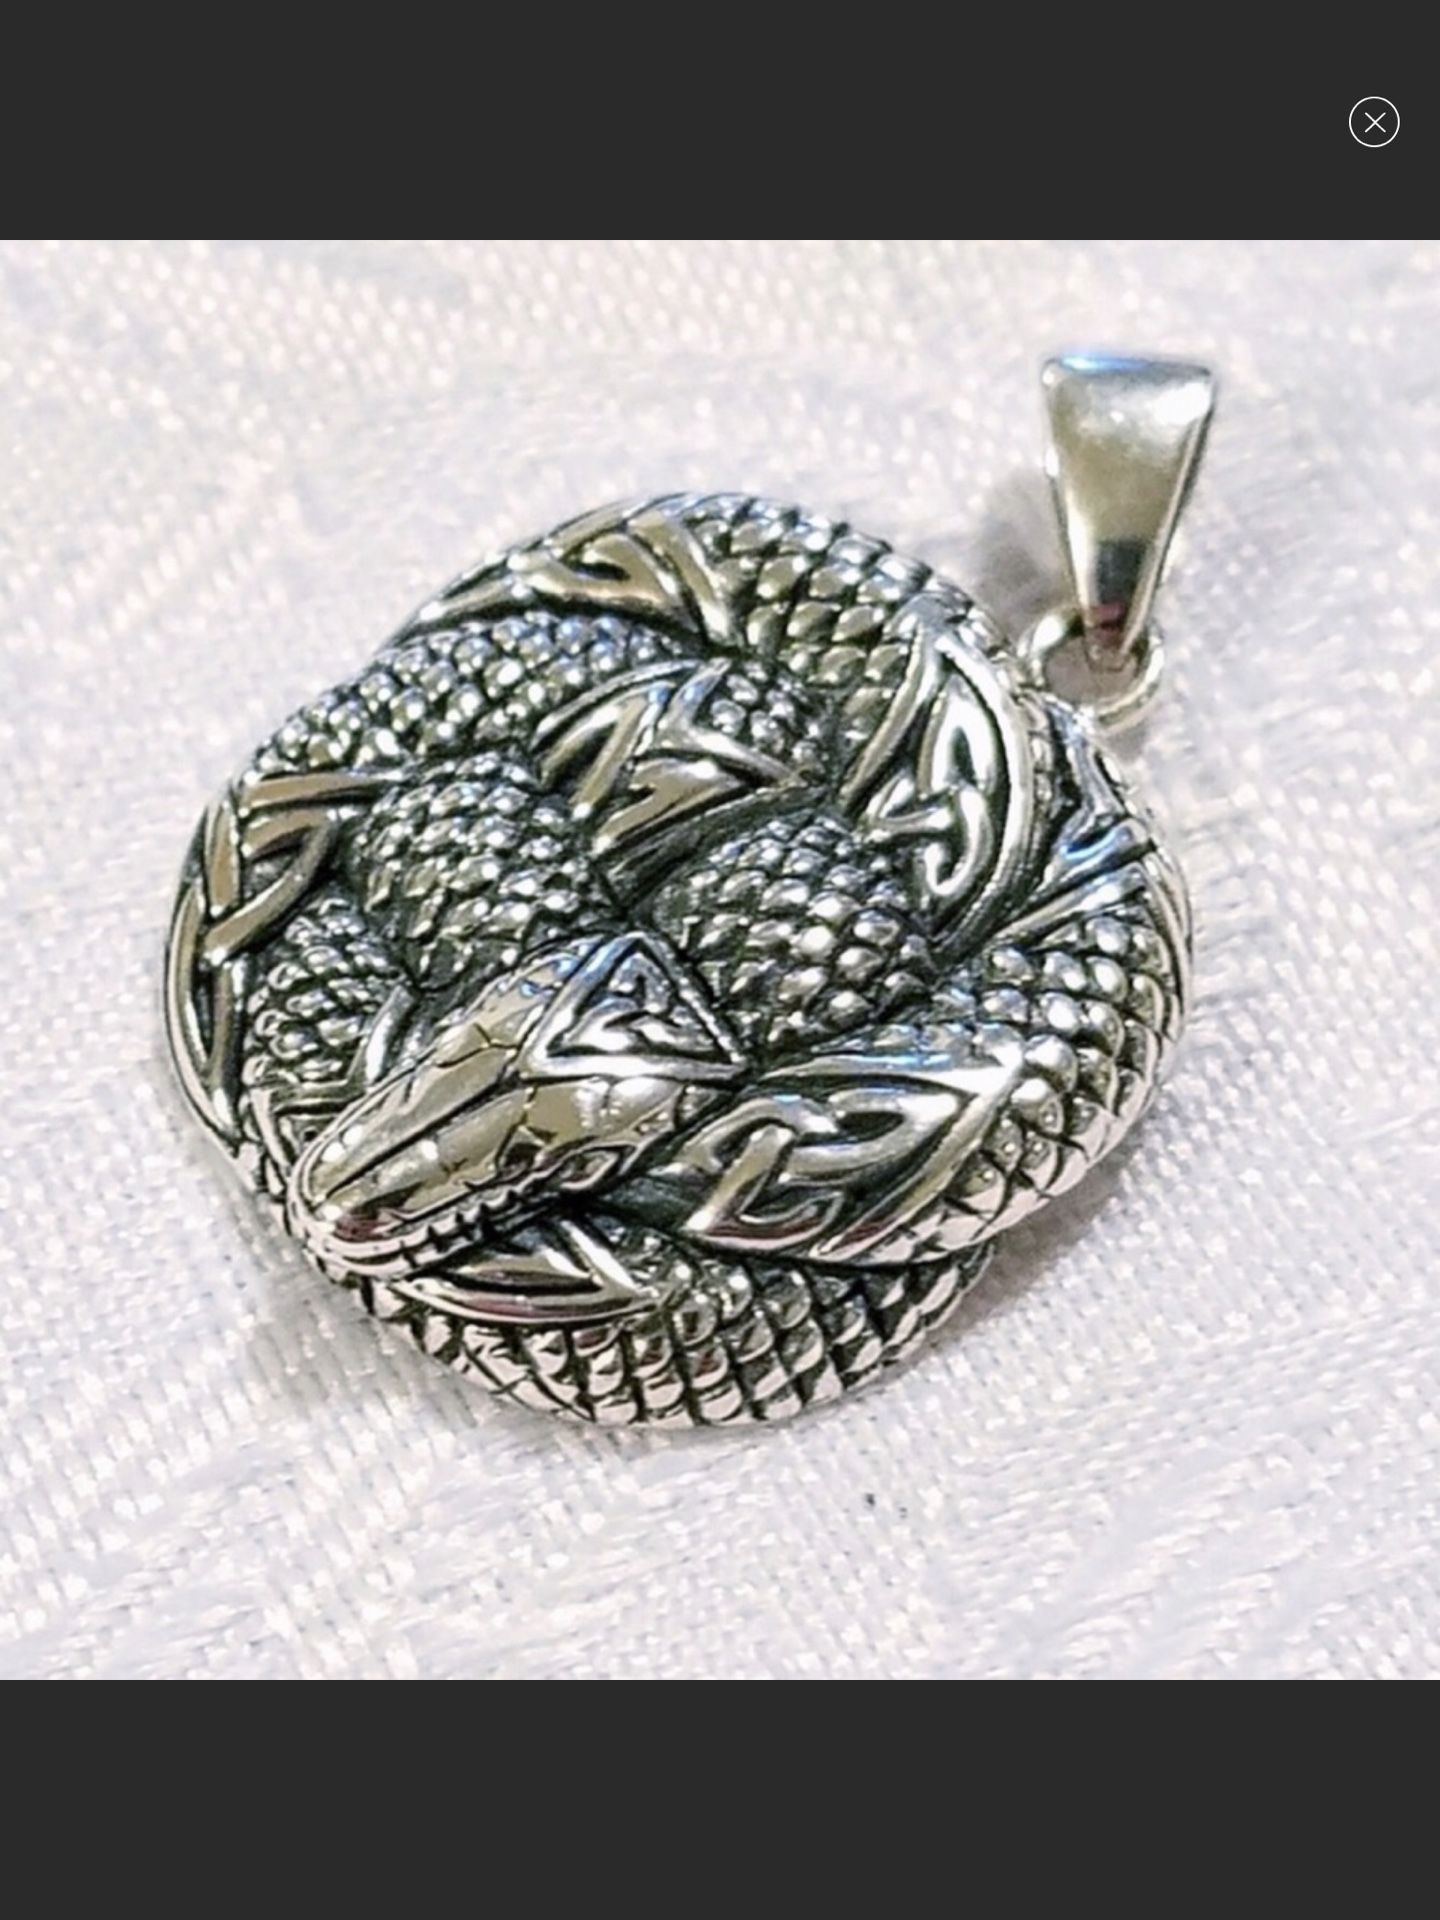 NWT Sterling Silver Coiled Snake Pendant